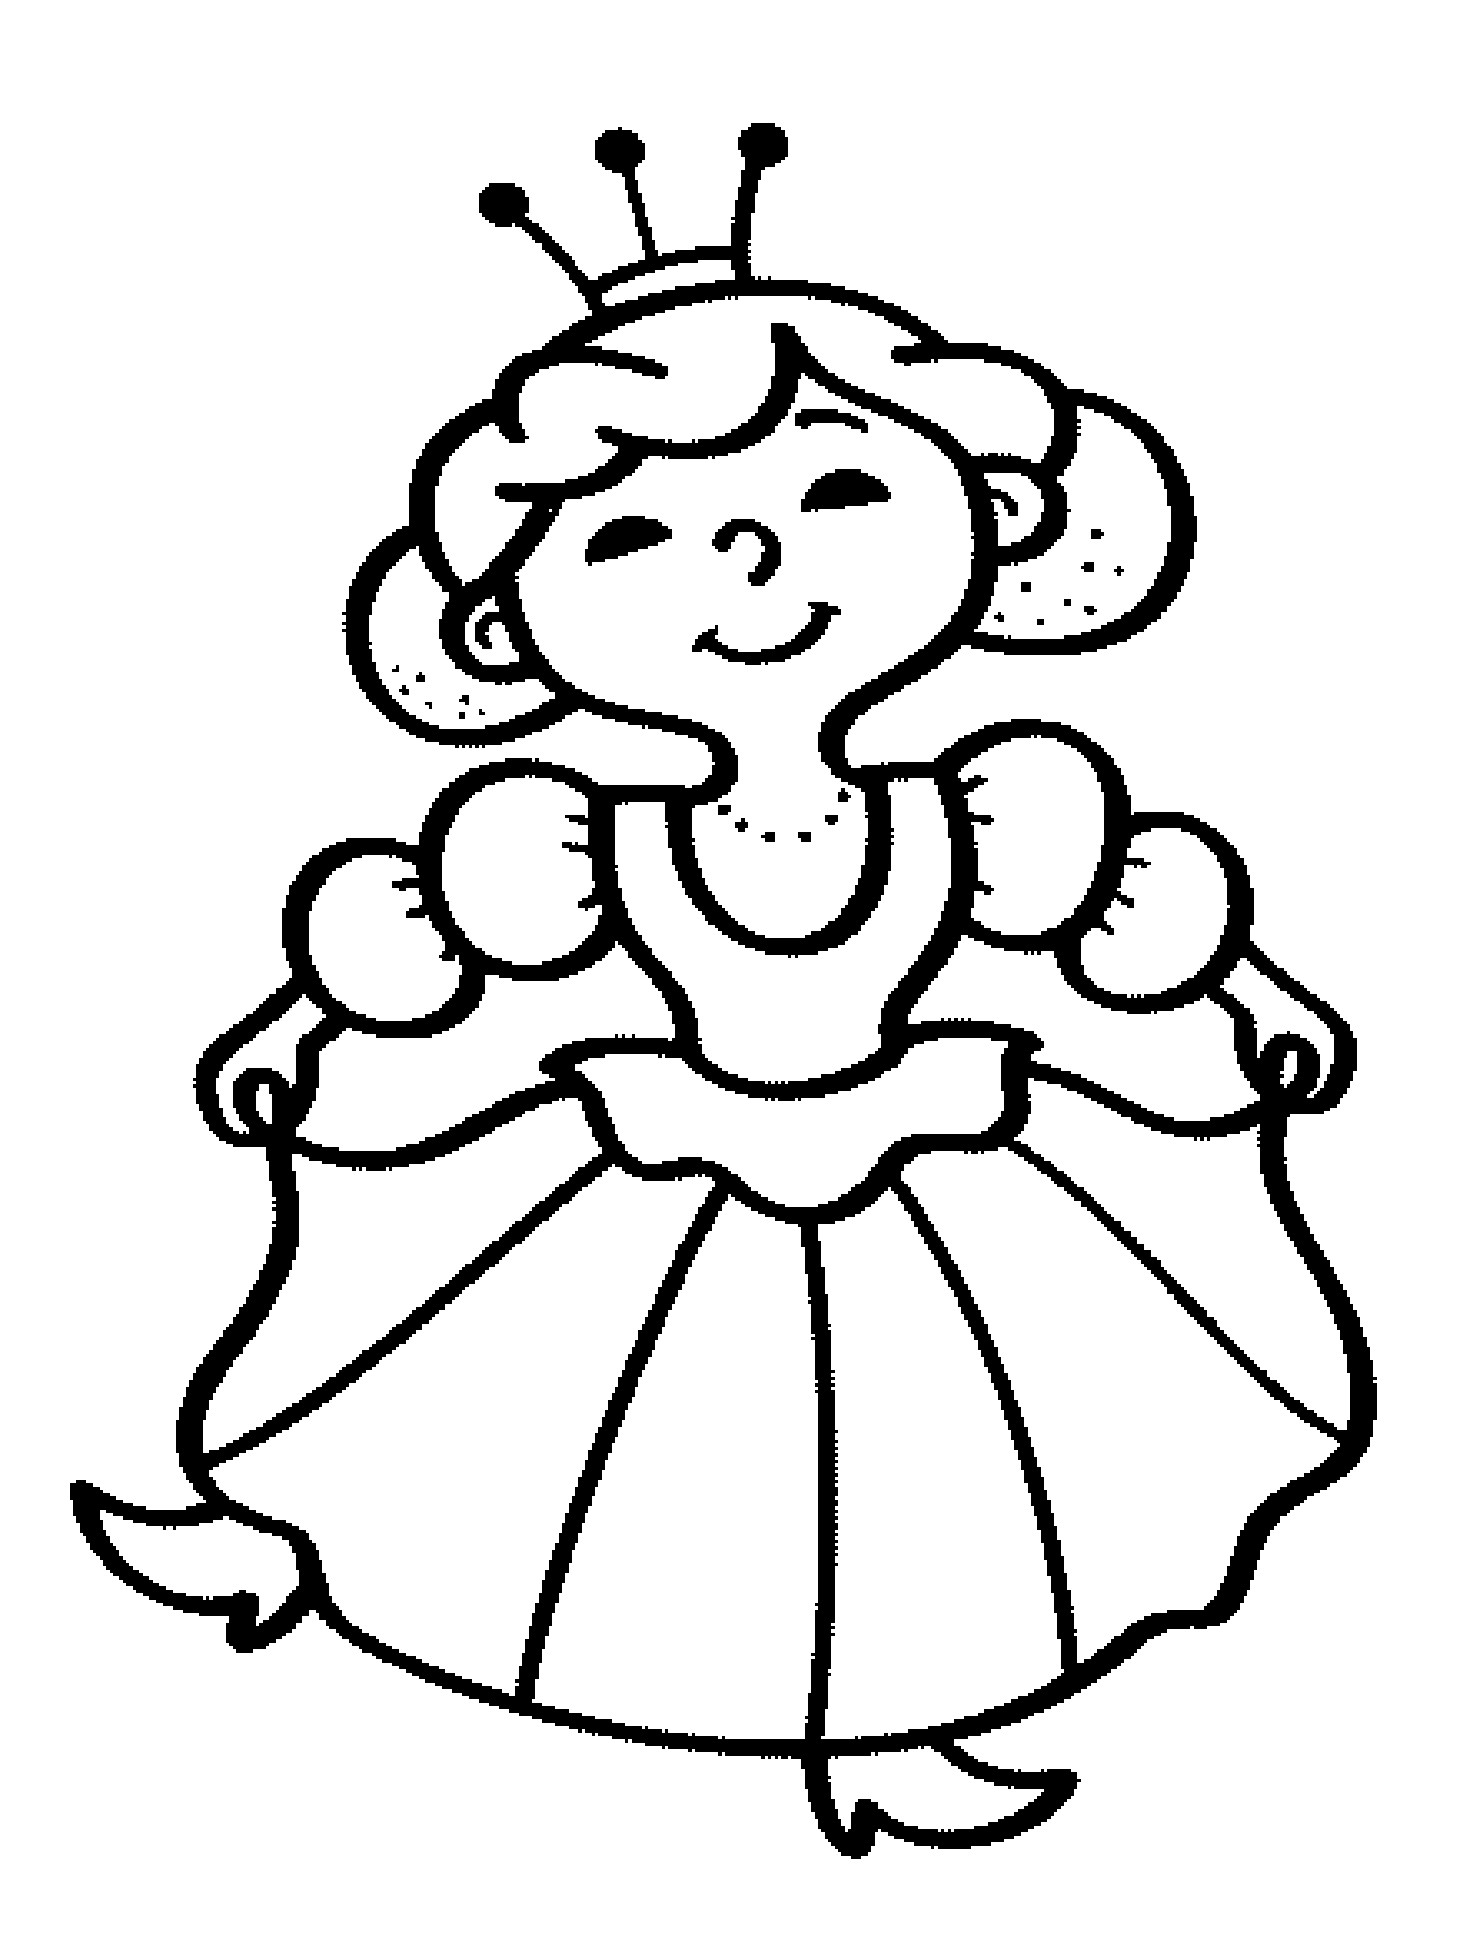 Queen coloring pages.